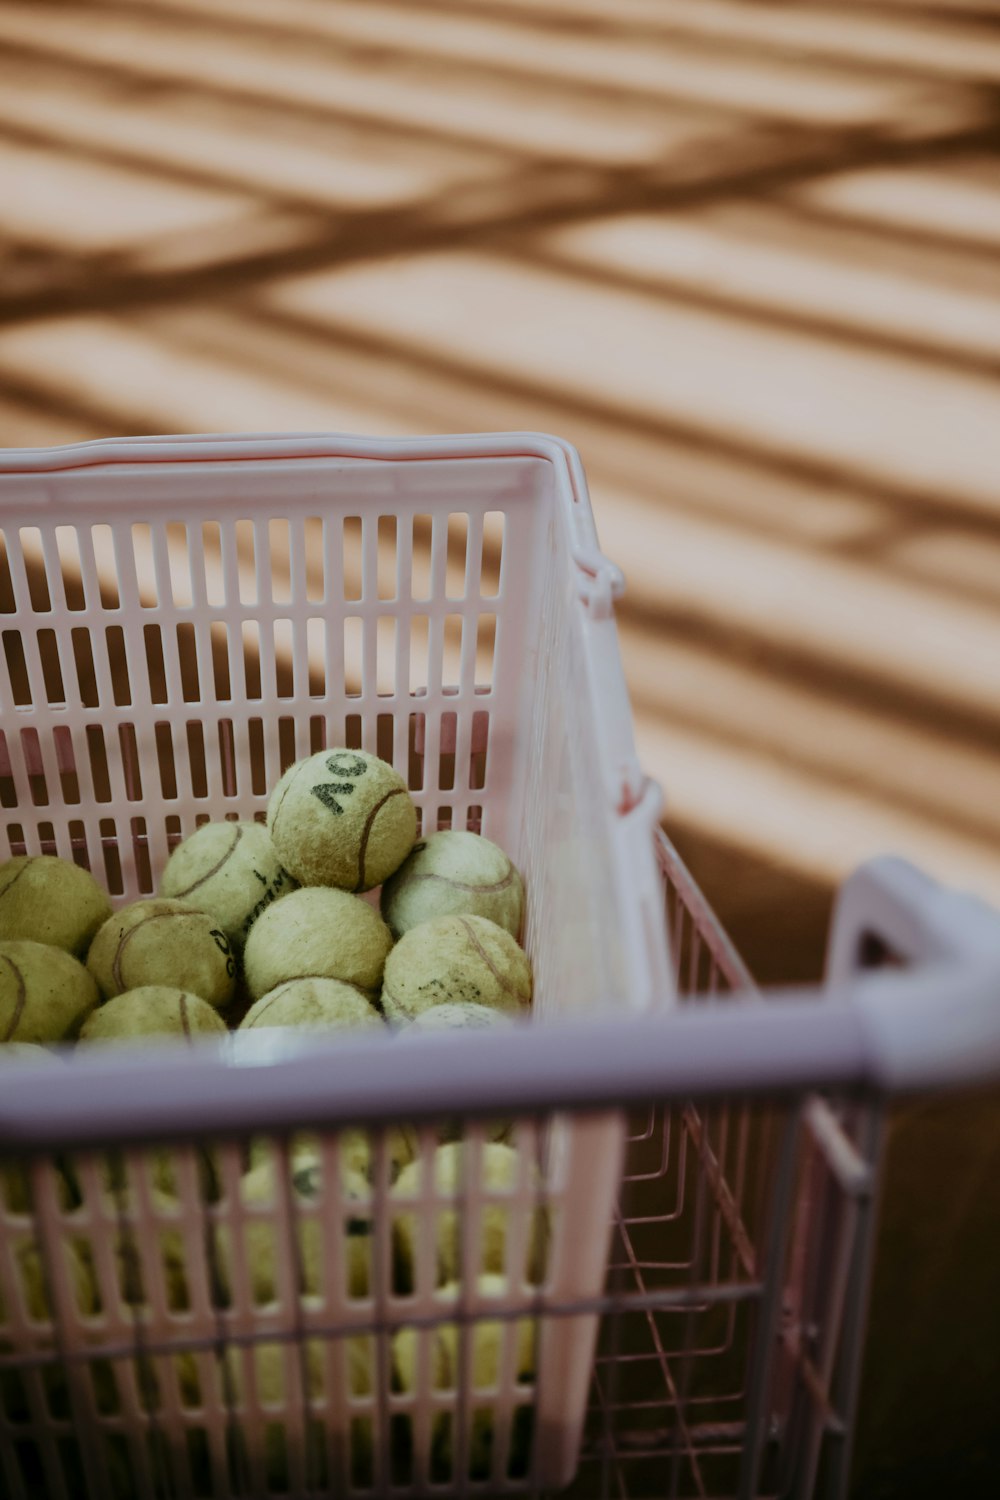 a basket filled with tennis balls on top of a wooden floor